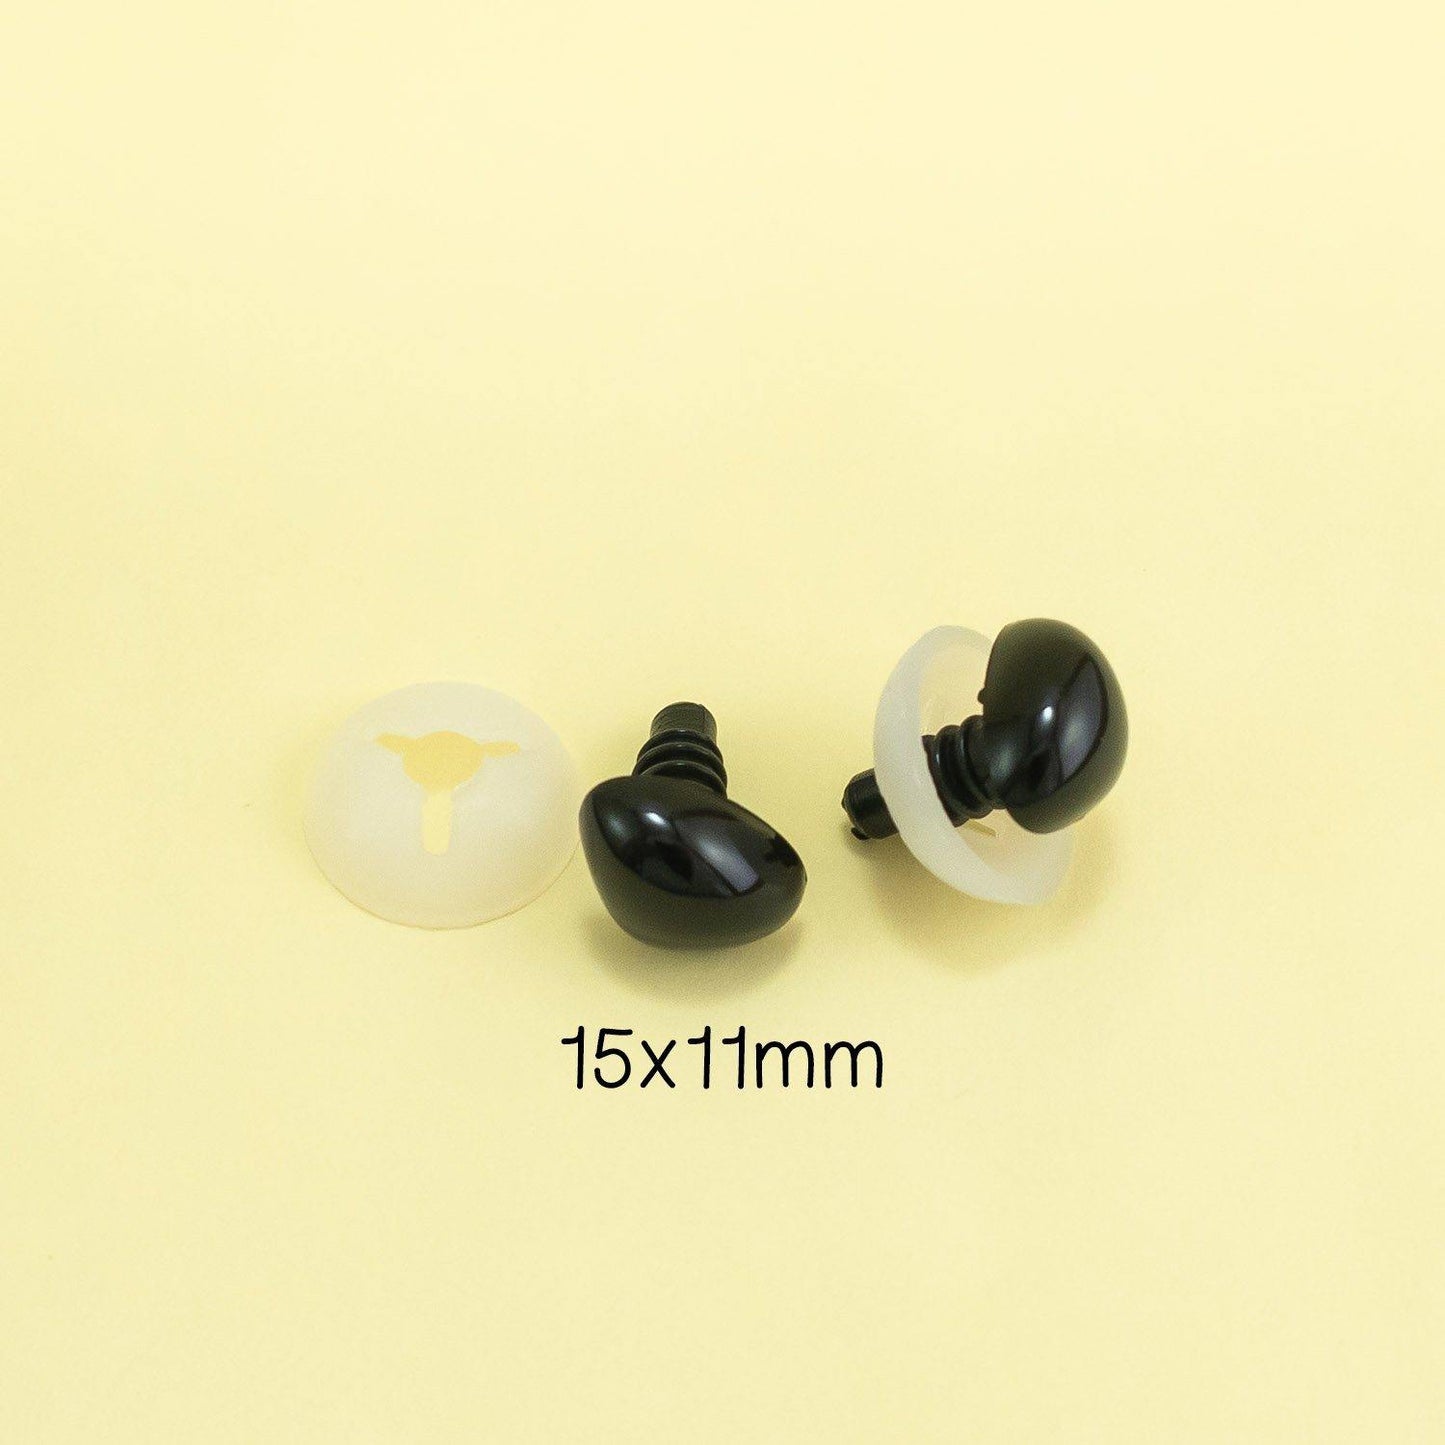 15mm x 11mm black triangle safety noses for handmade teddy bears